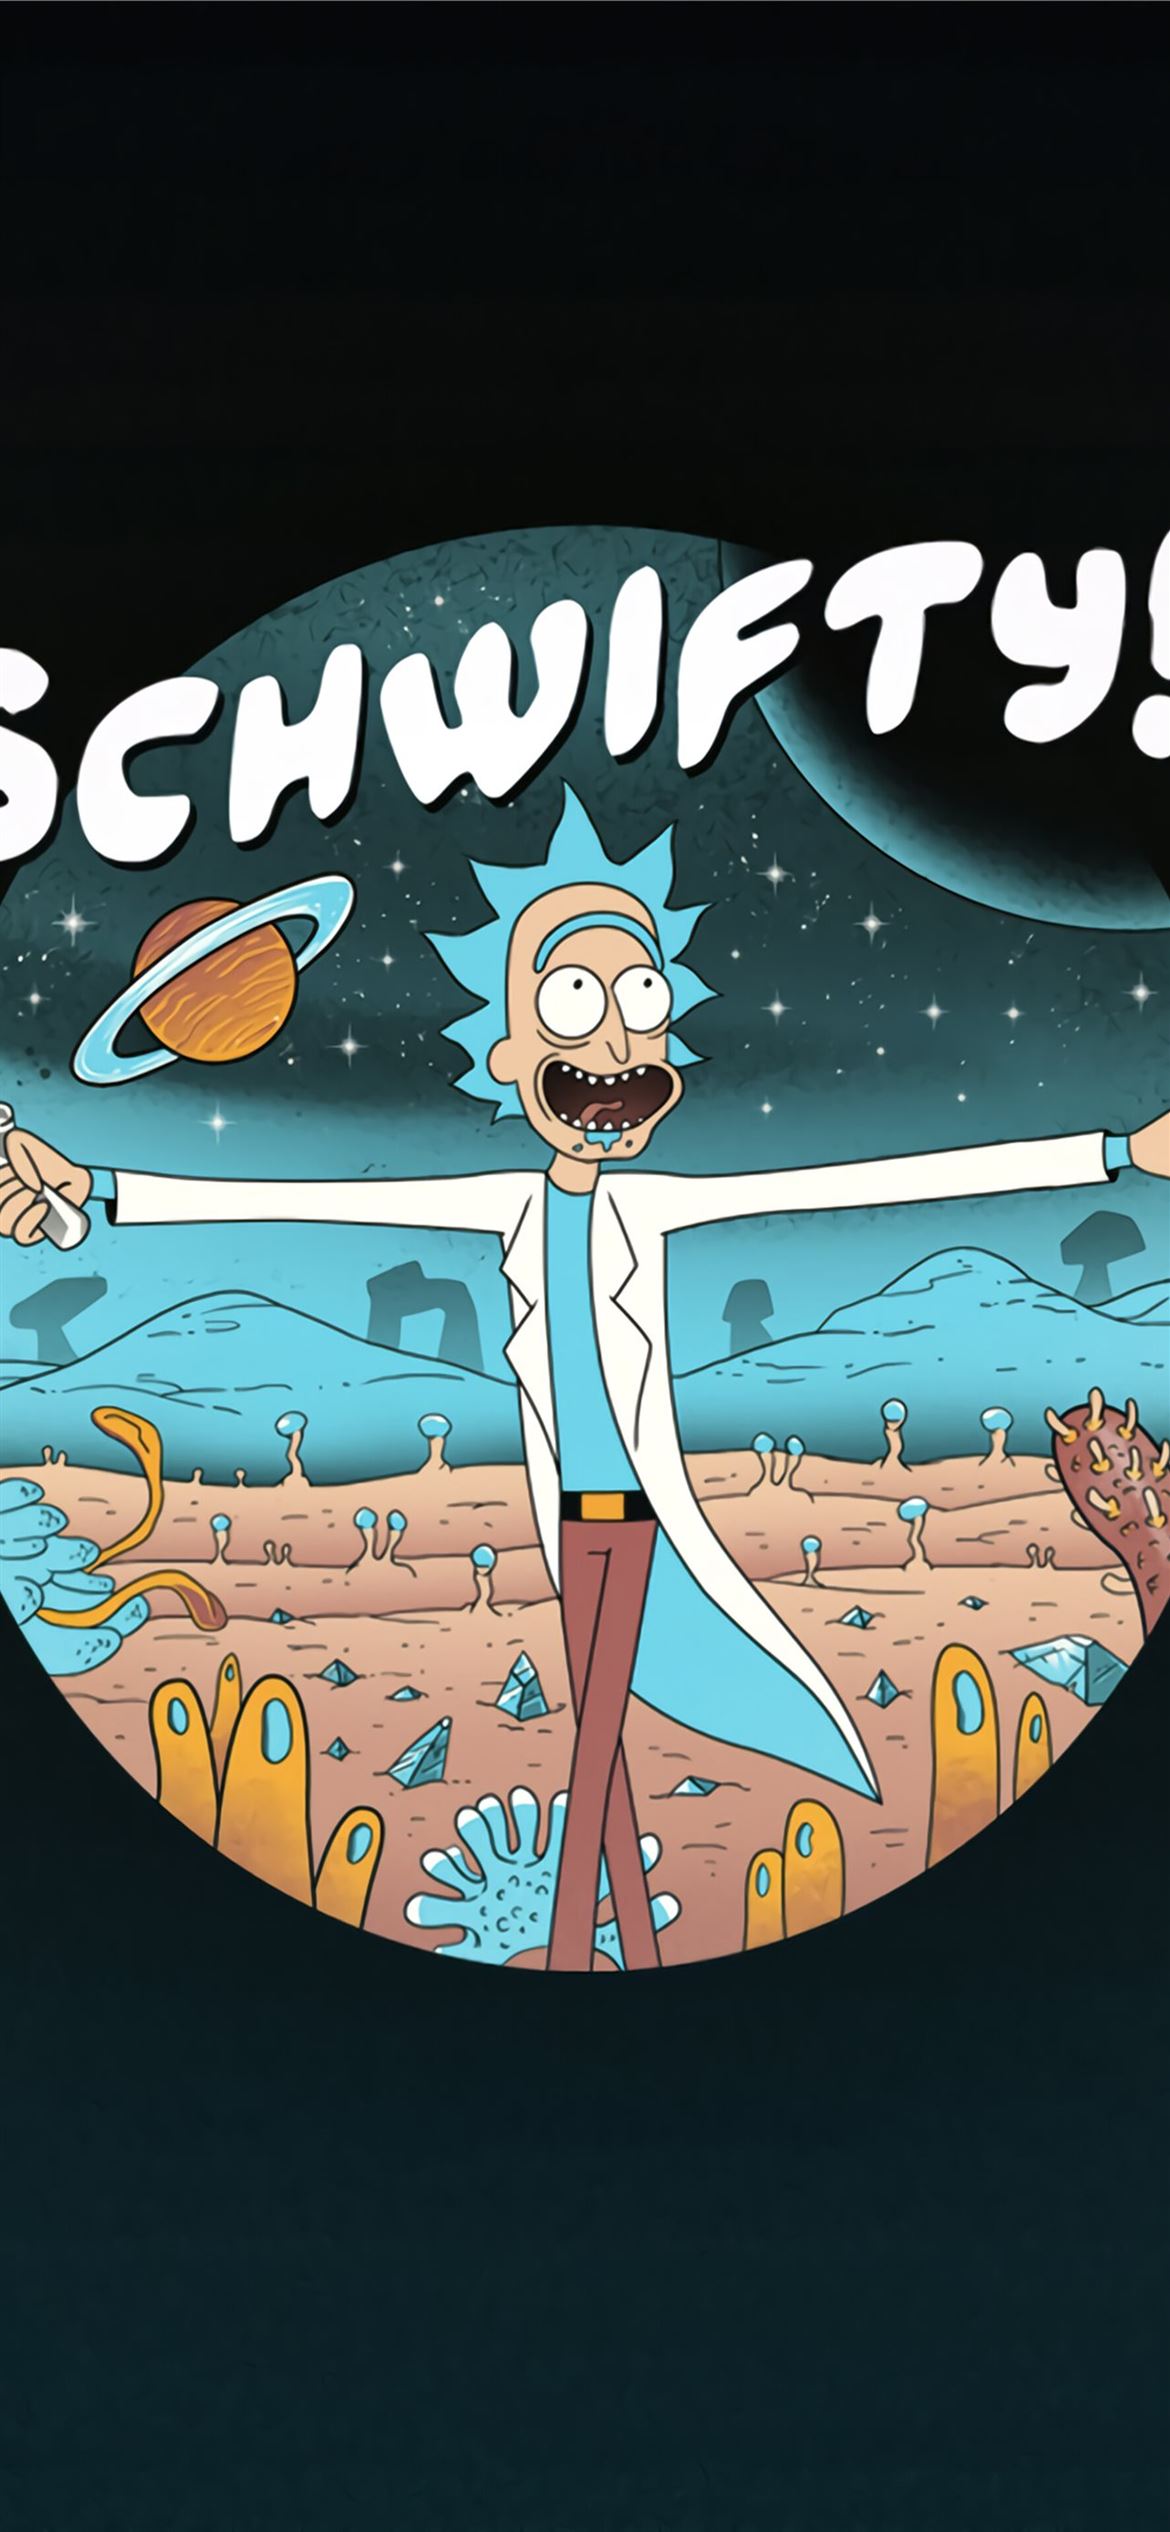 Download Rick And Morty wallpapers for mobile phone, free Rick